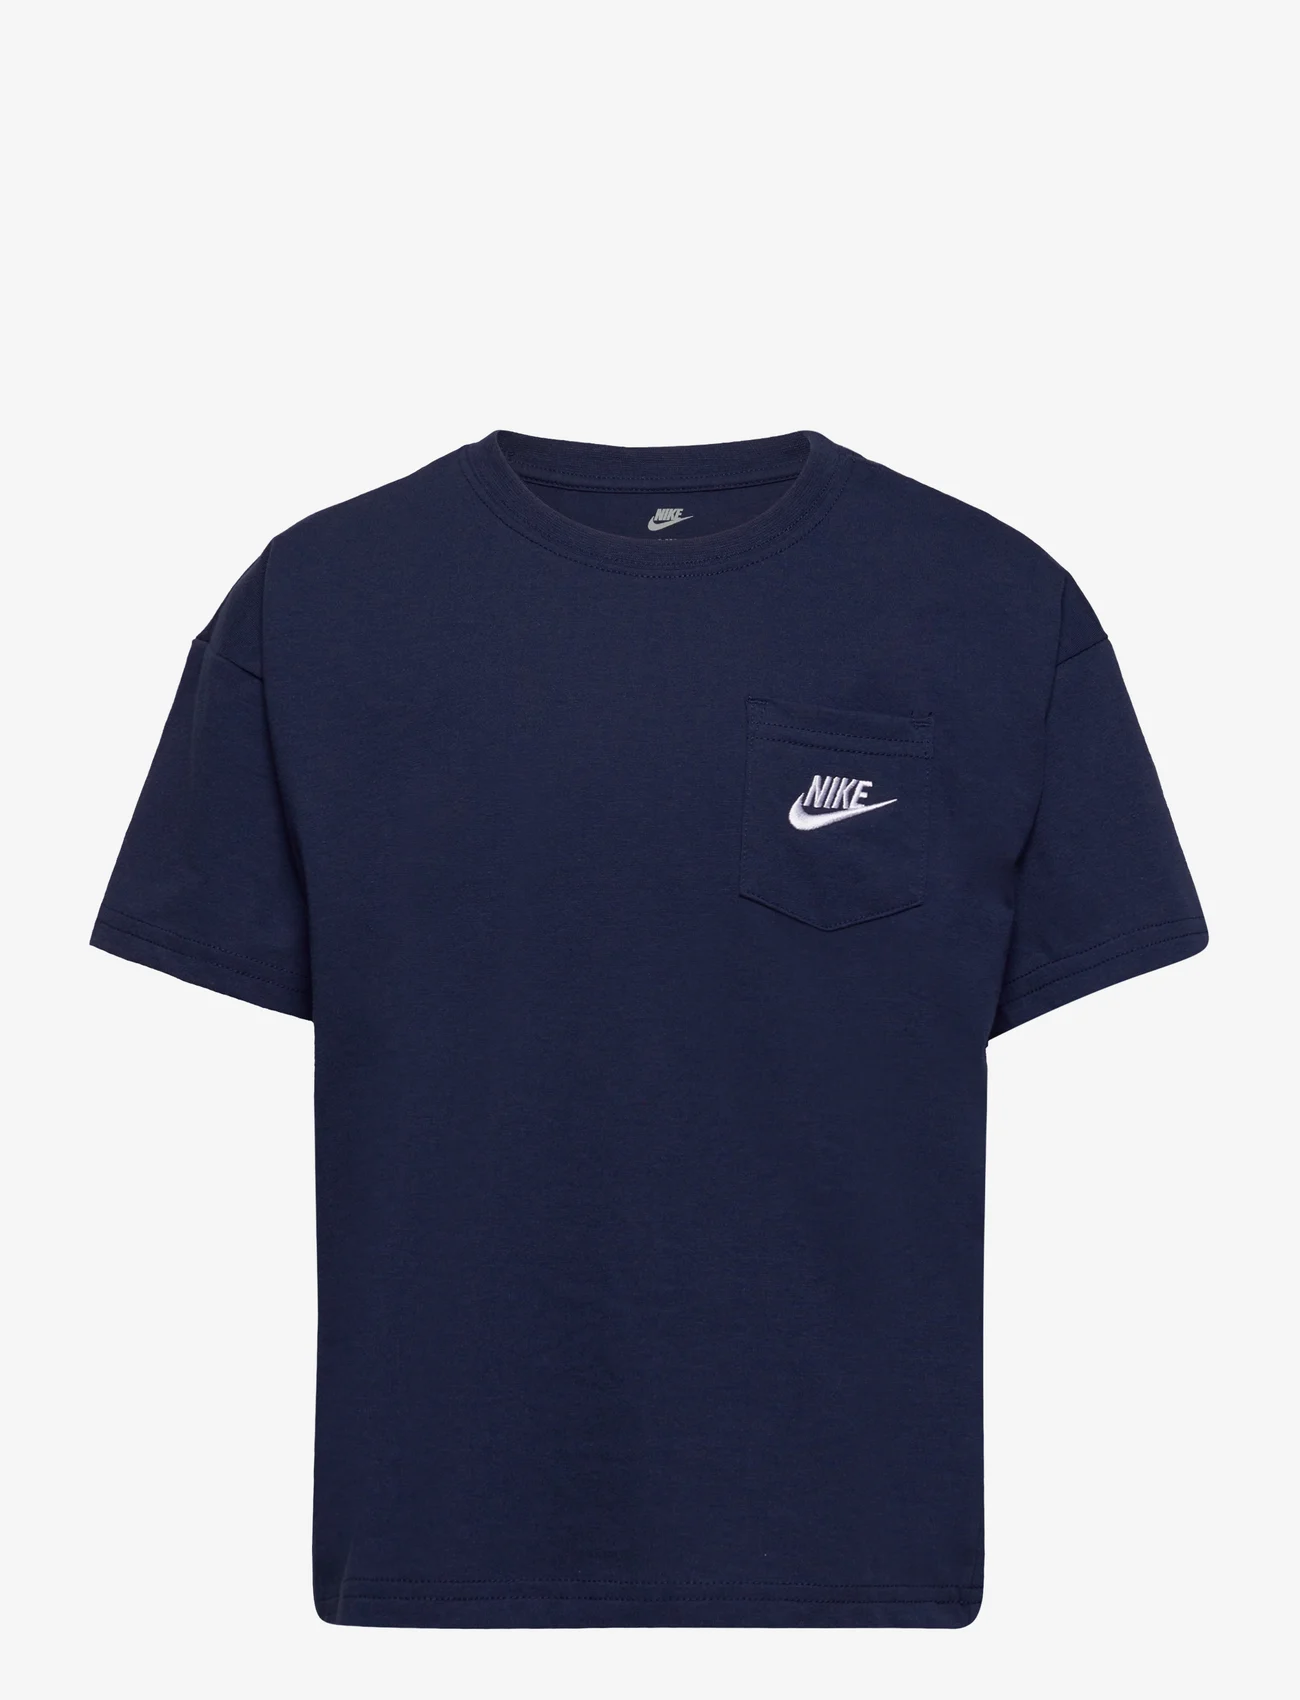 Nike - B NSW RELAXED POCKET TEE - short-sleeved t-shirts - midnight navy - 0